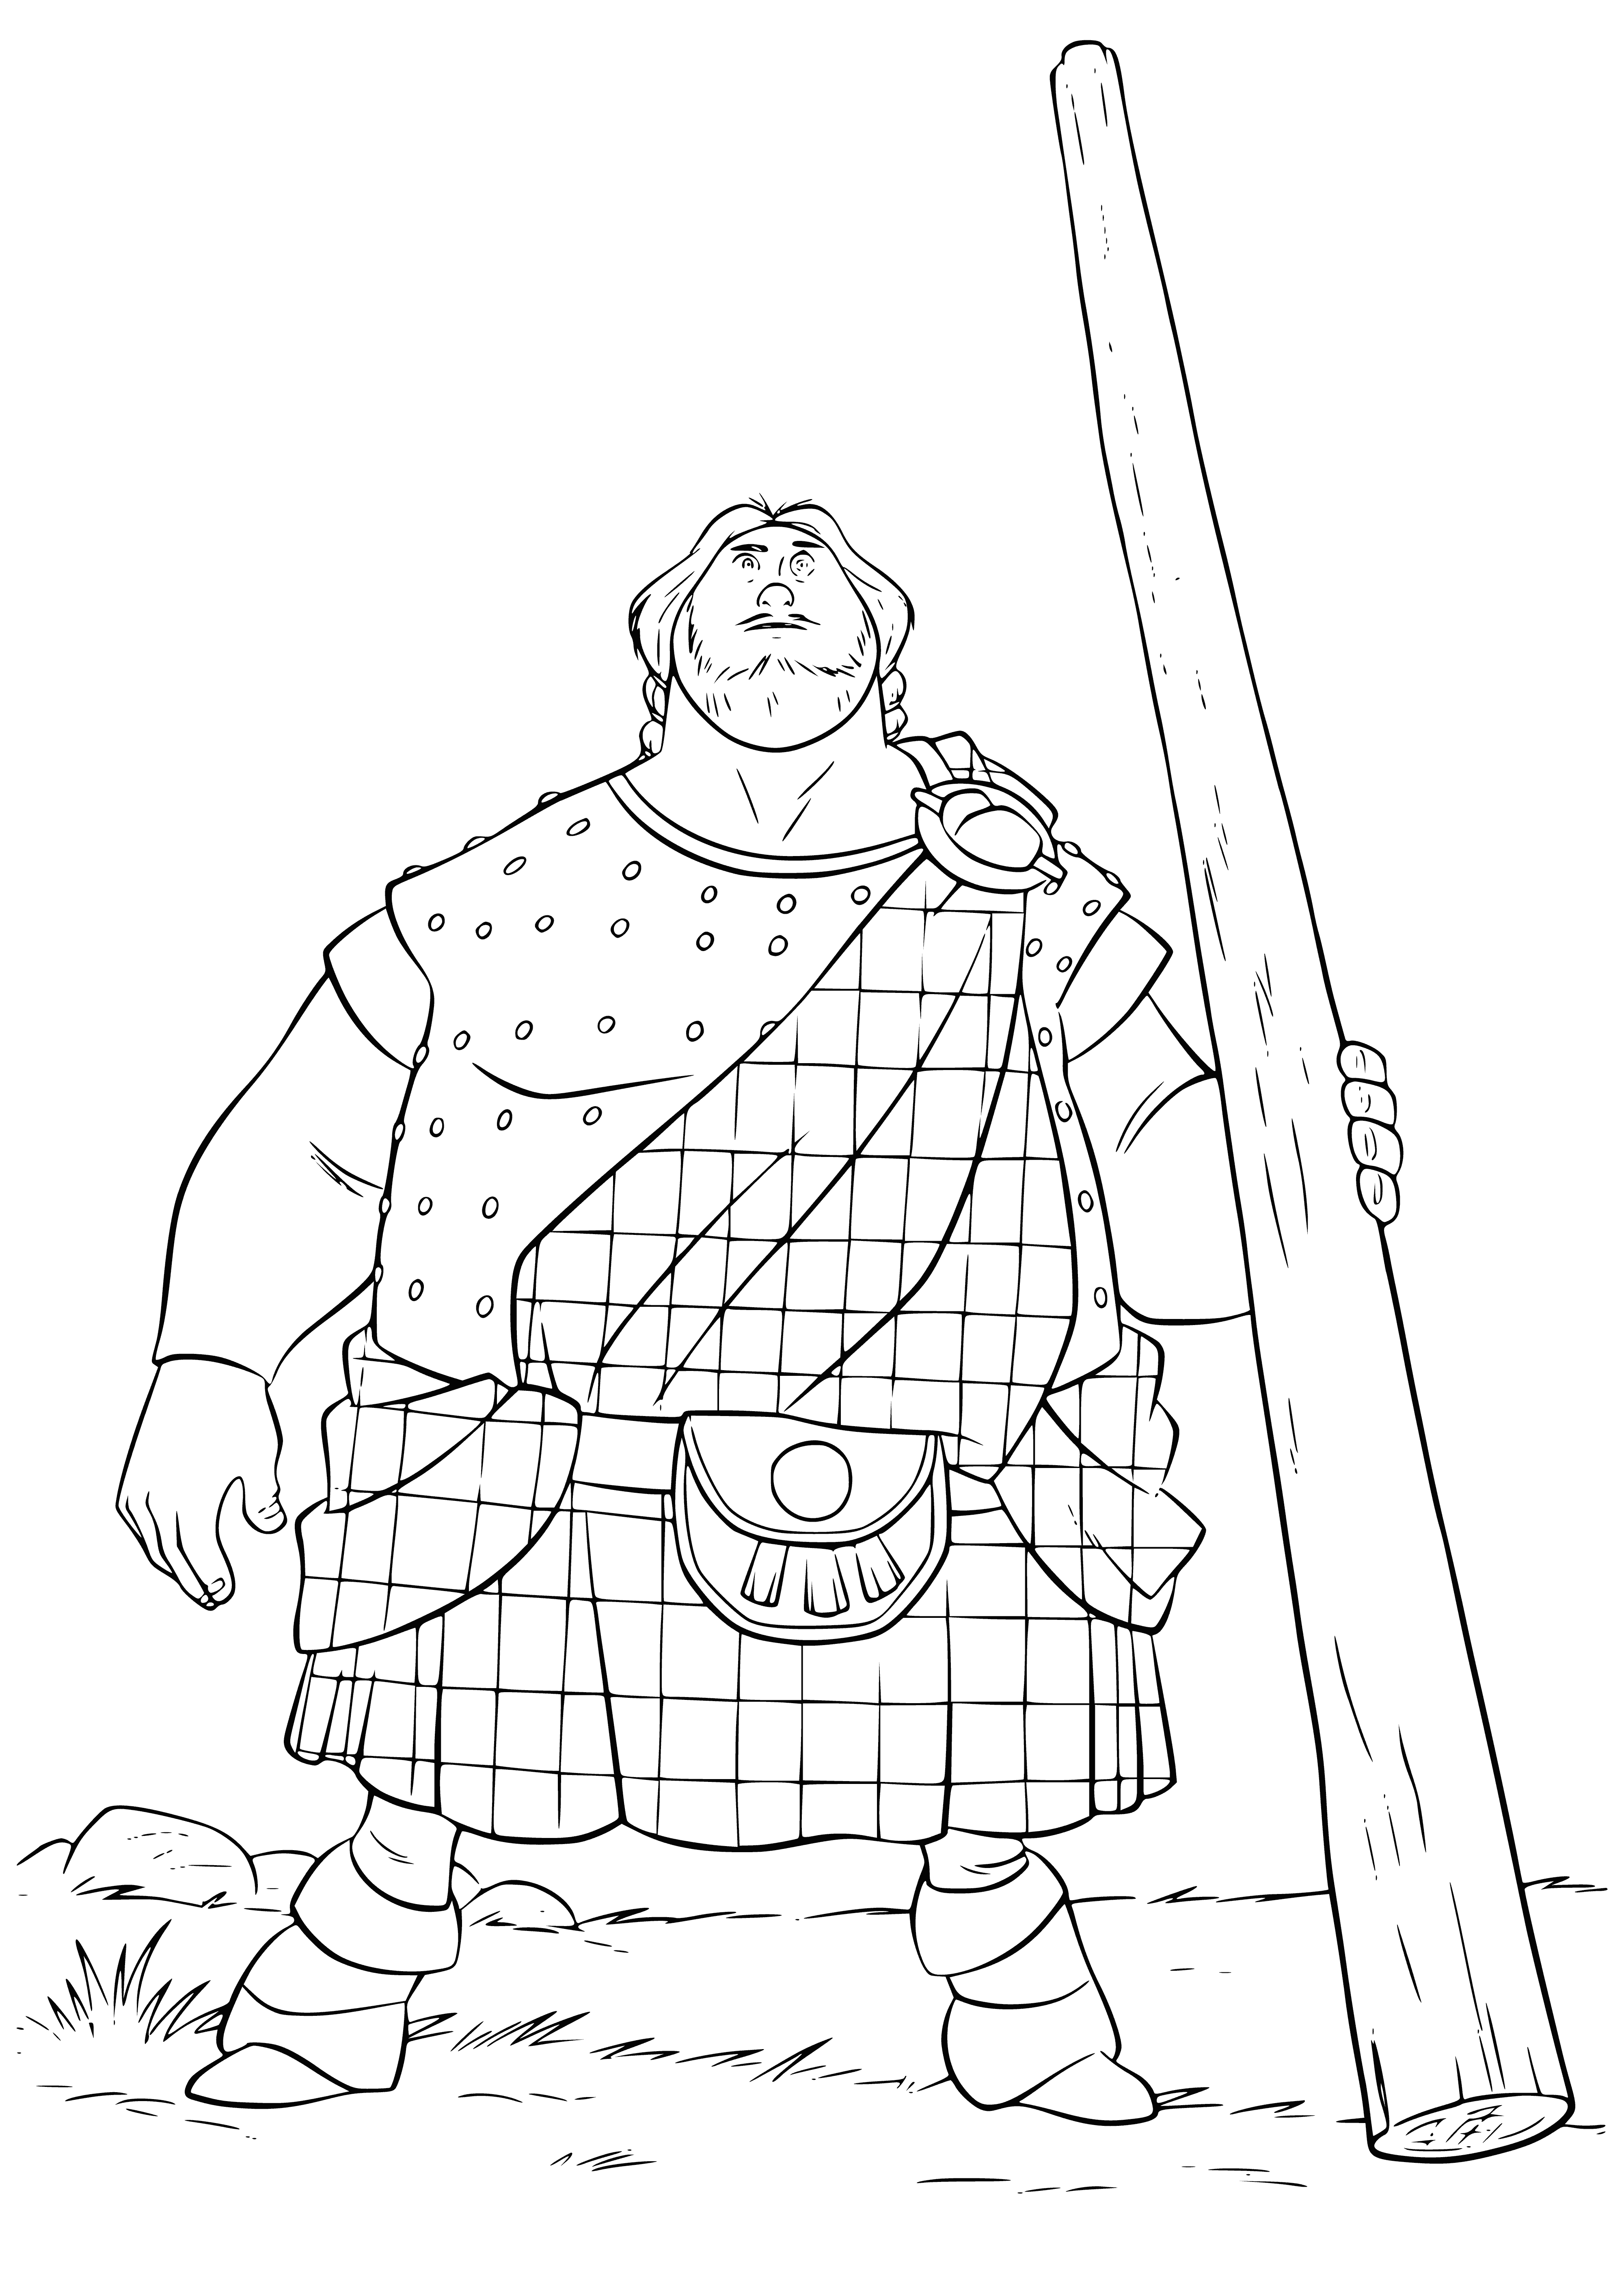 coloring page: Man stands in room, wearing red shirt & holding sword. Gazing at painting on wall.